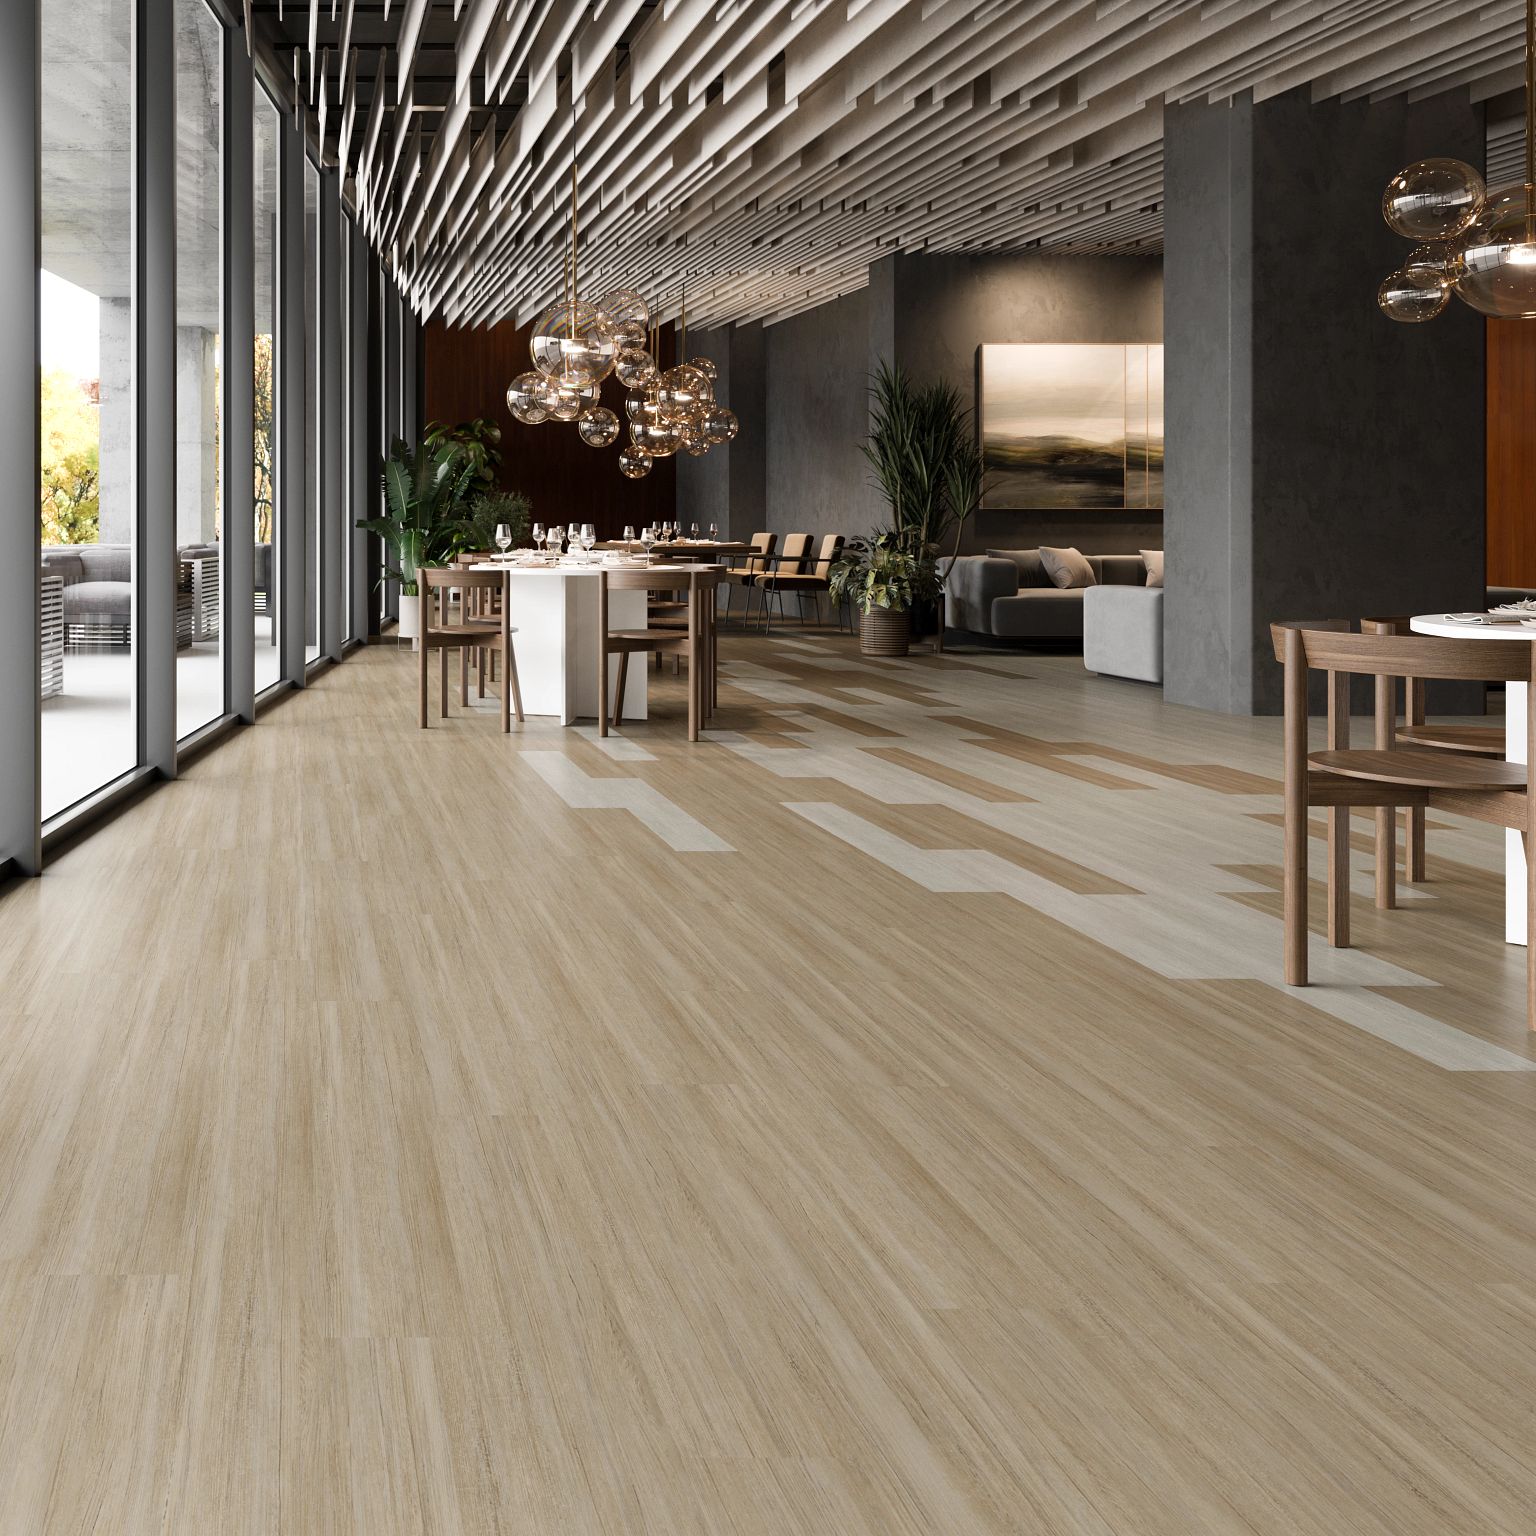 working directly with flooring manufacturers in Scottsdale